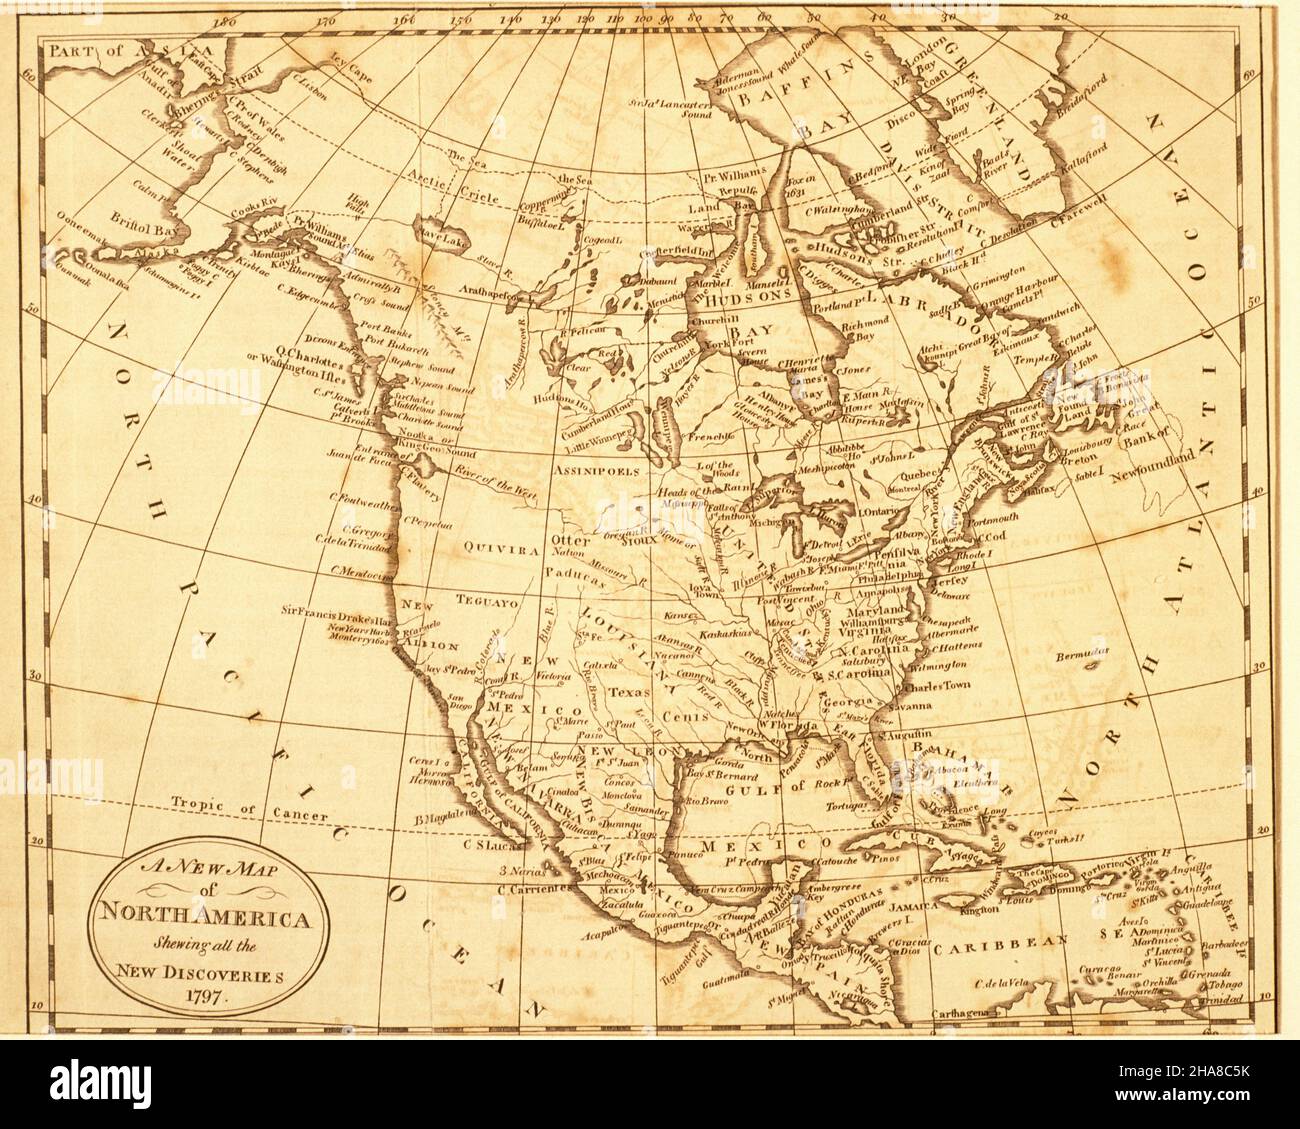 1790s MAP OF NORTH AMERICA SHOWING ALL NEWEST DISCOVERIES IN 1797 - ks38501 NAW001 HARS CONCEPTUAL STYLISH 1797 DISCOVERIES GROWTH 1790s AERIAL VIEW BLACK AND WHITE NEW WORLD OLD FASHIONED Stock Photo